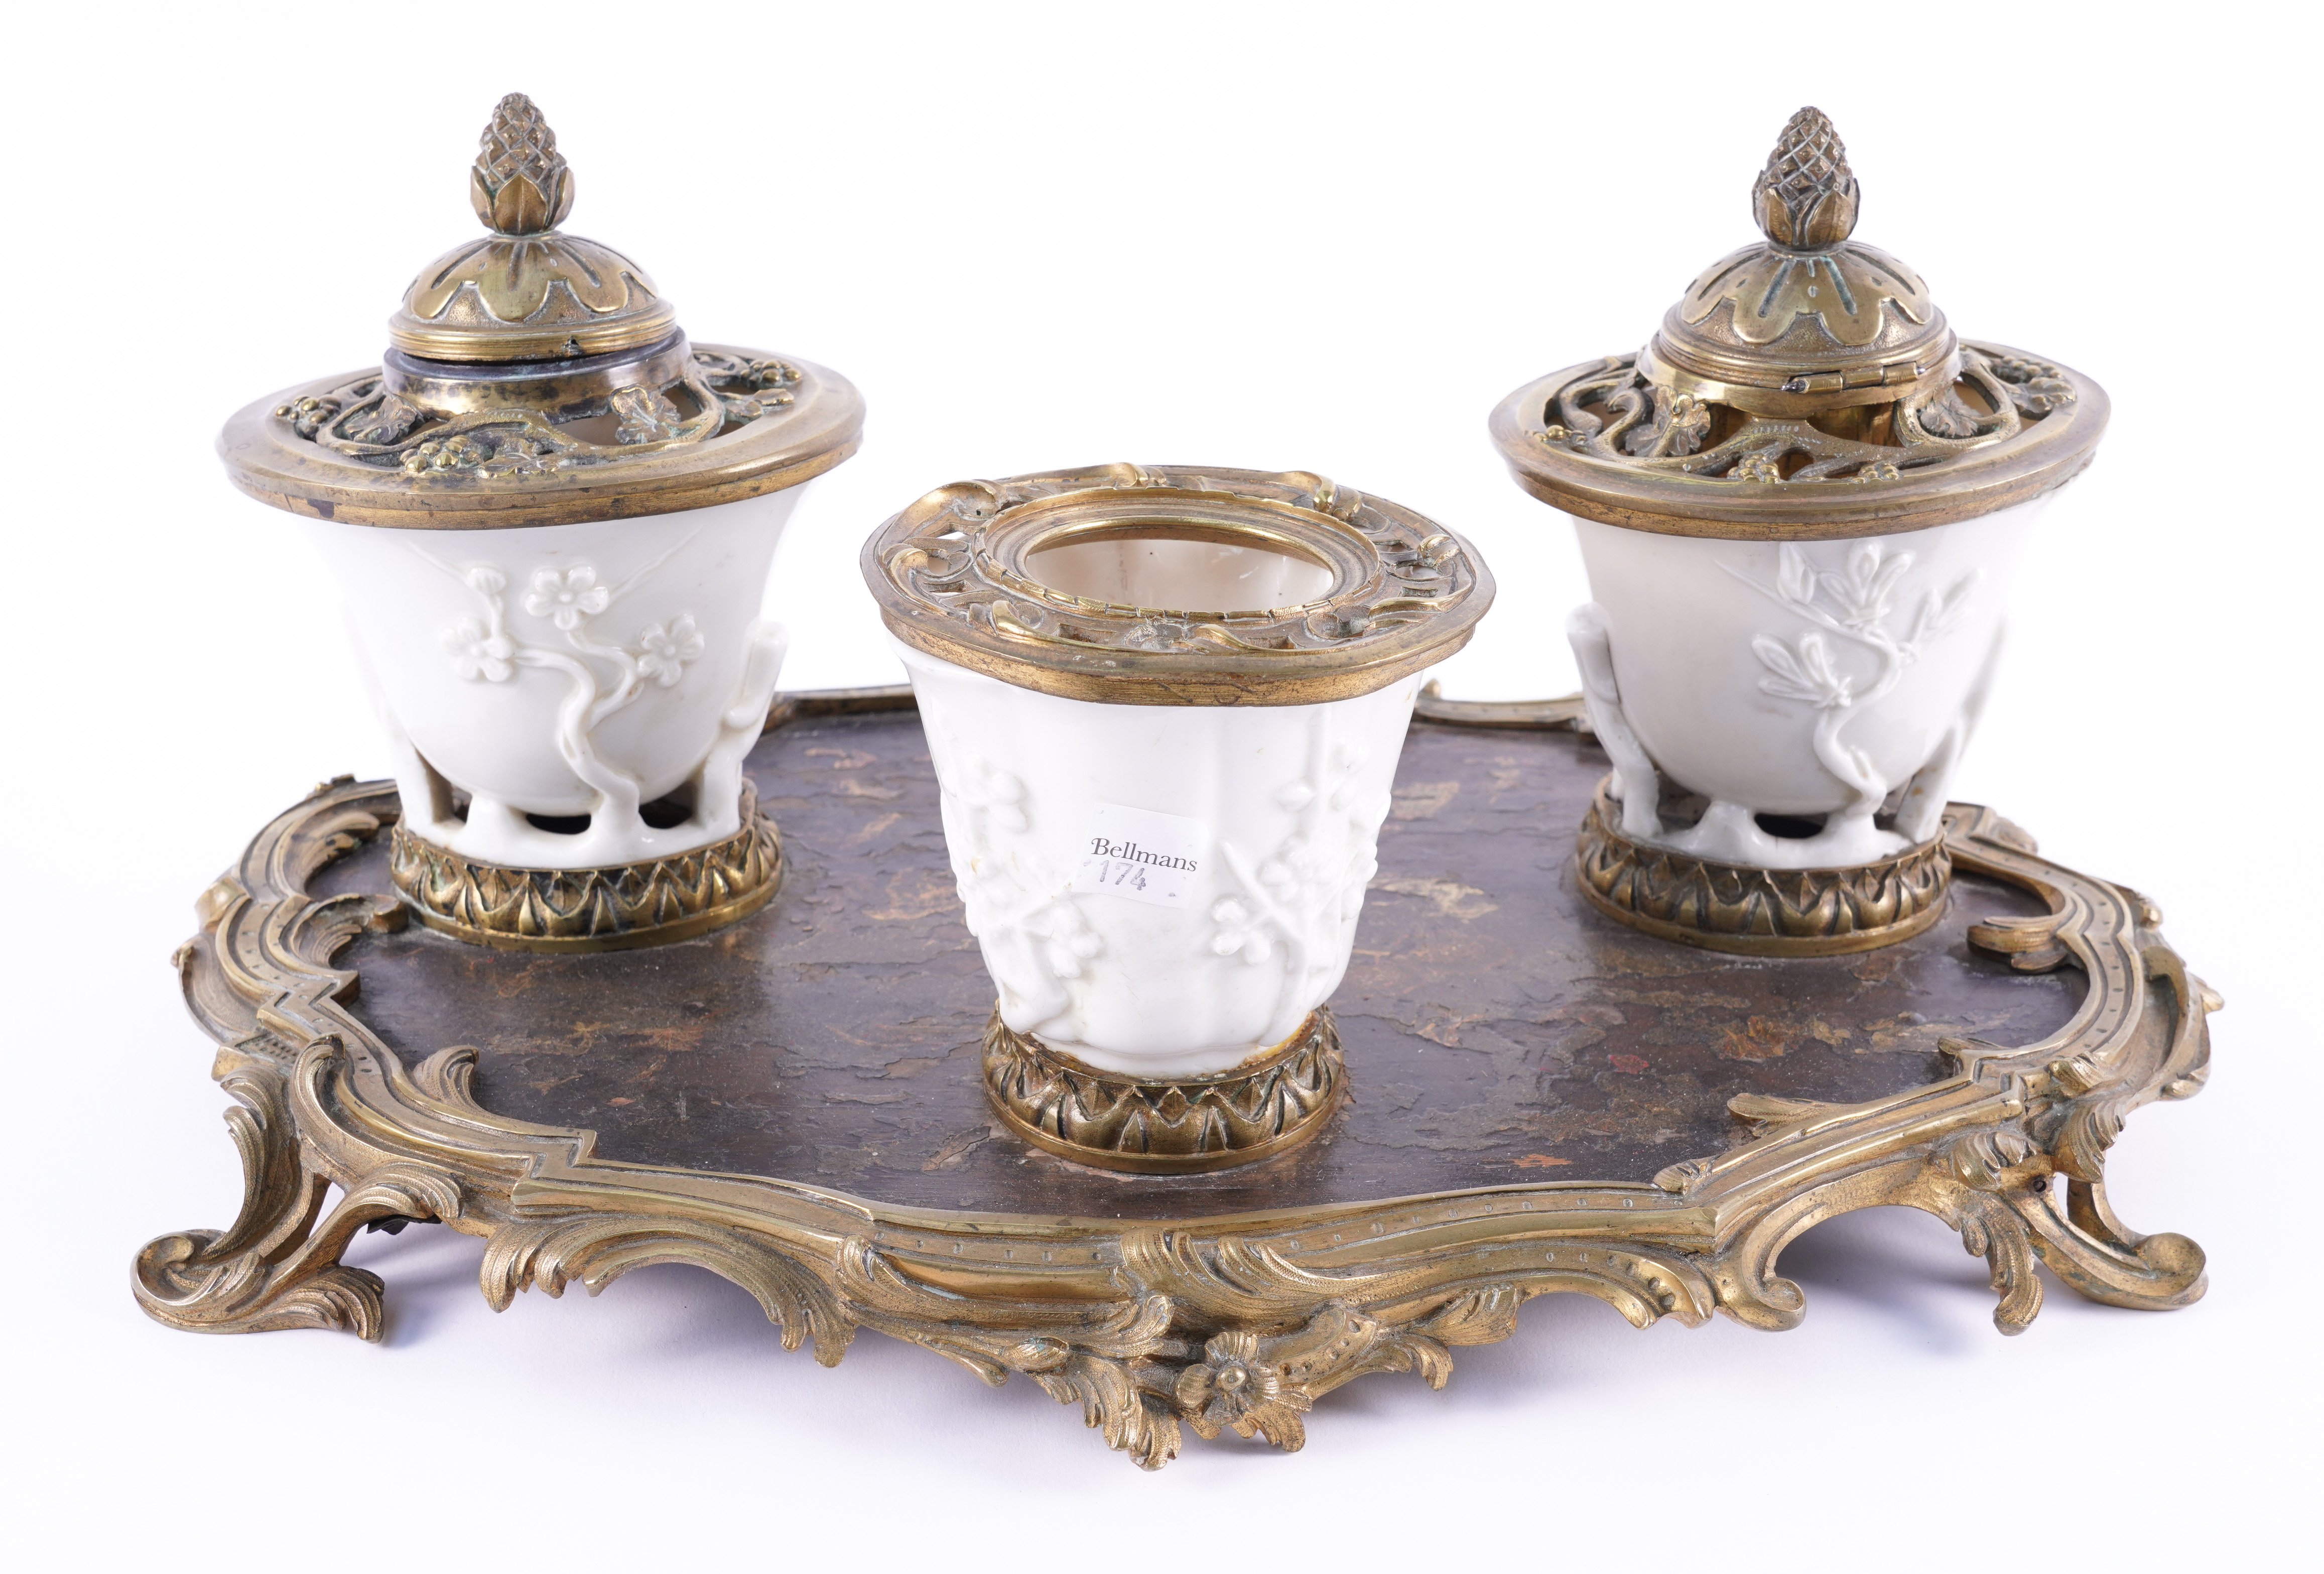 A LOUIS XV STYLE GILT-METAL MOUNTED CHINESE BLANC DE CHINE AND JAPANESE LACQUER INKSTAND/ENCRIER - Image 4 of 6